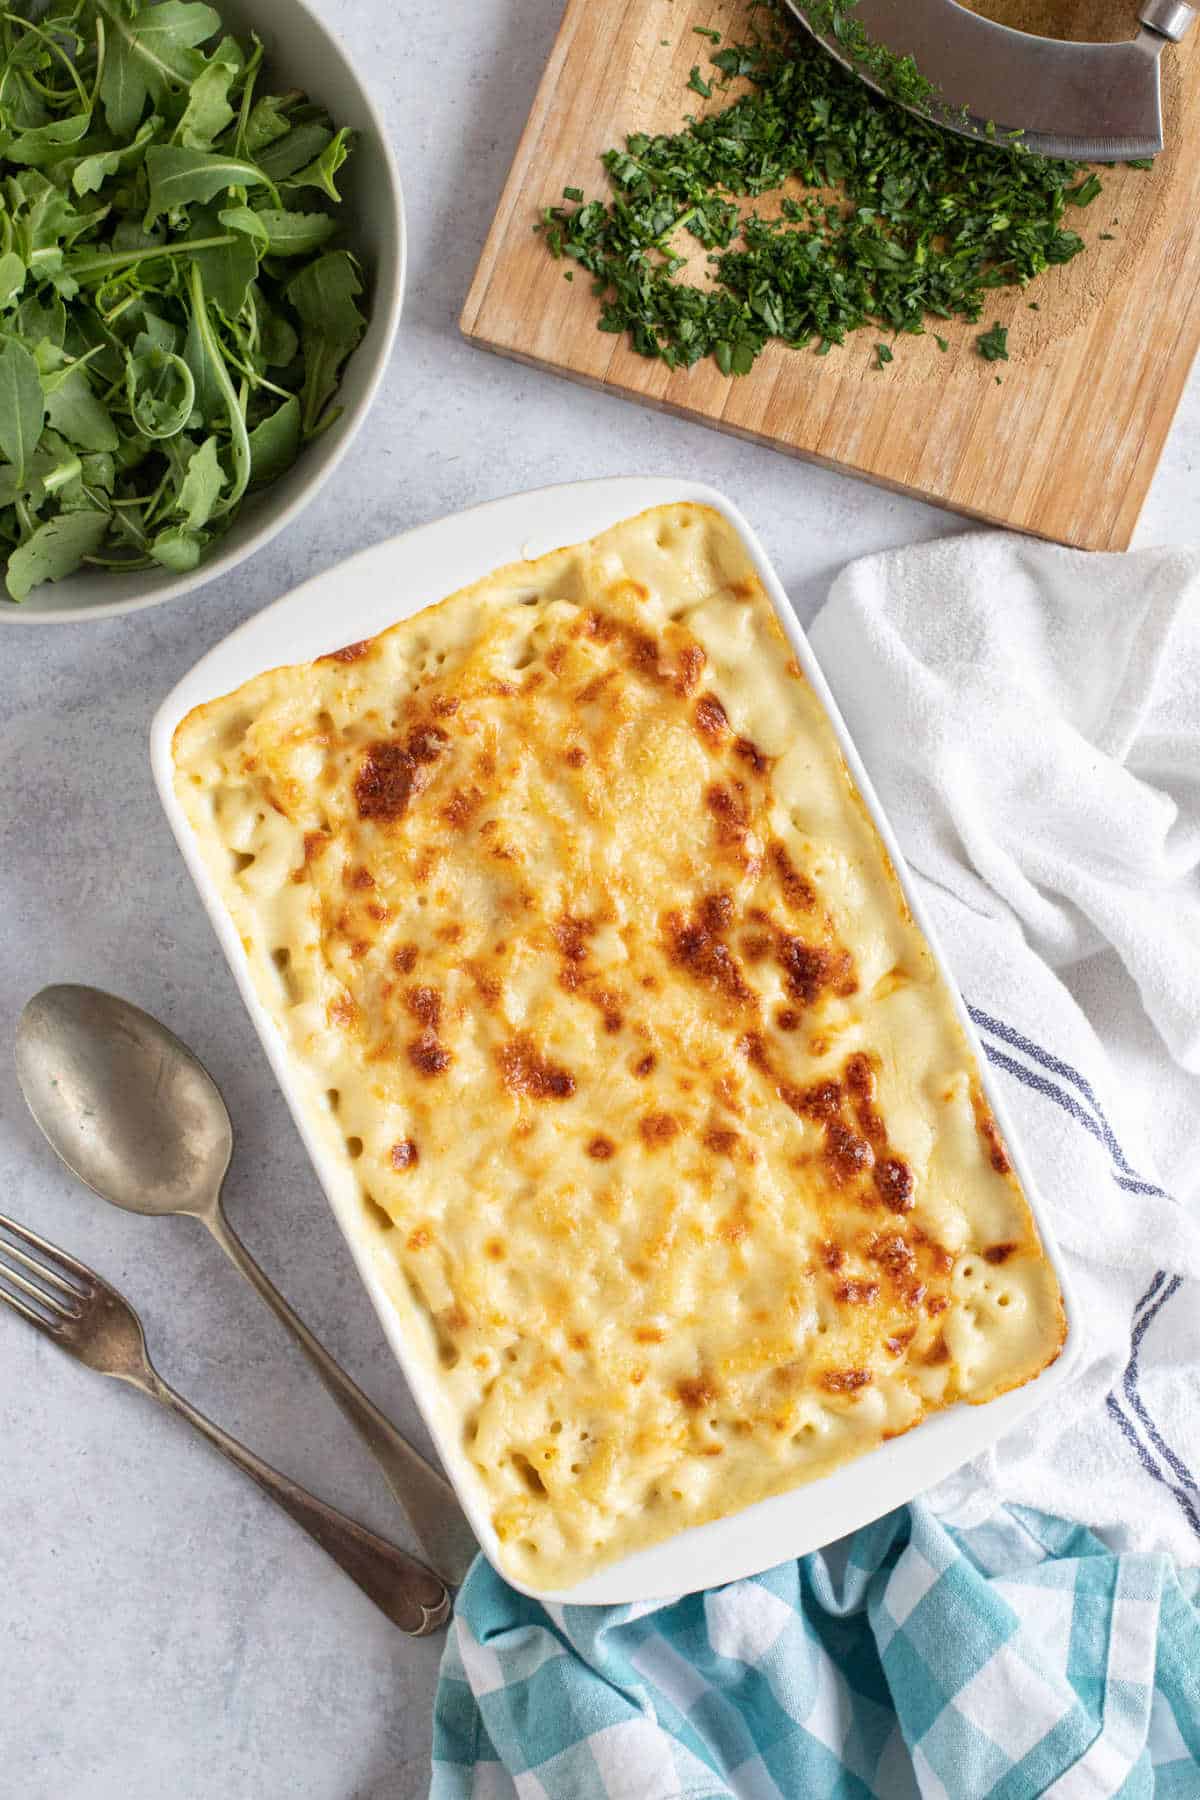 Baked macaroni cheese in a white serving dish.